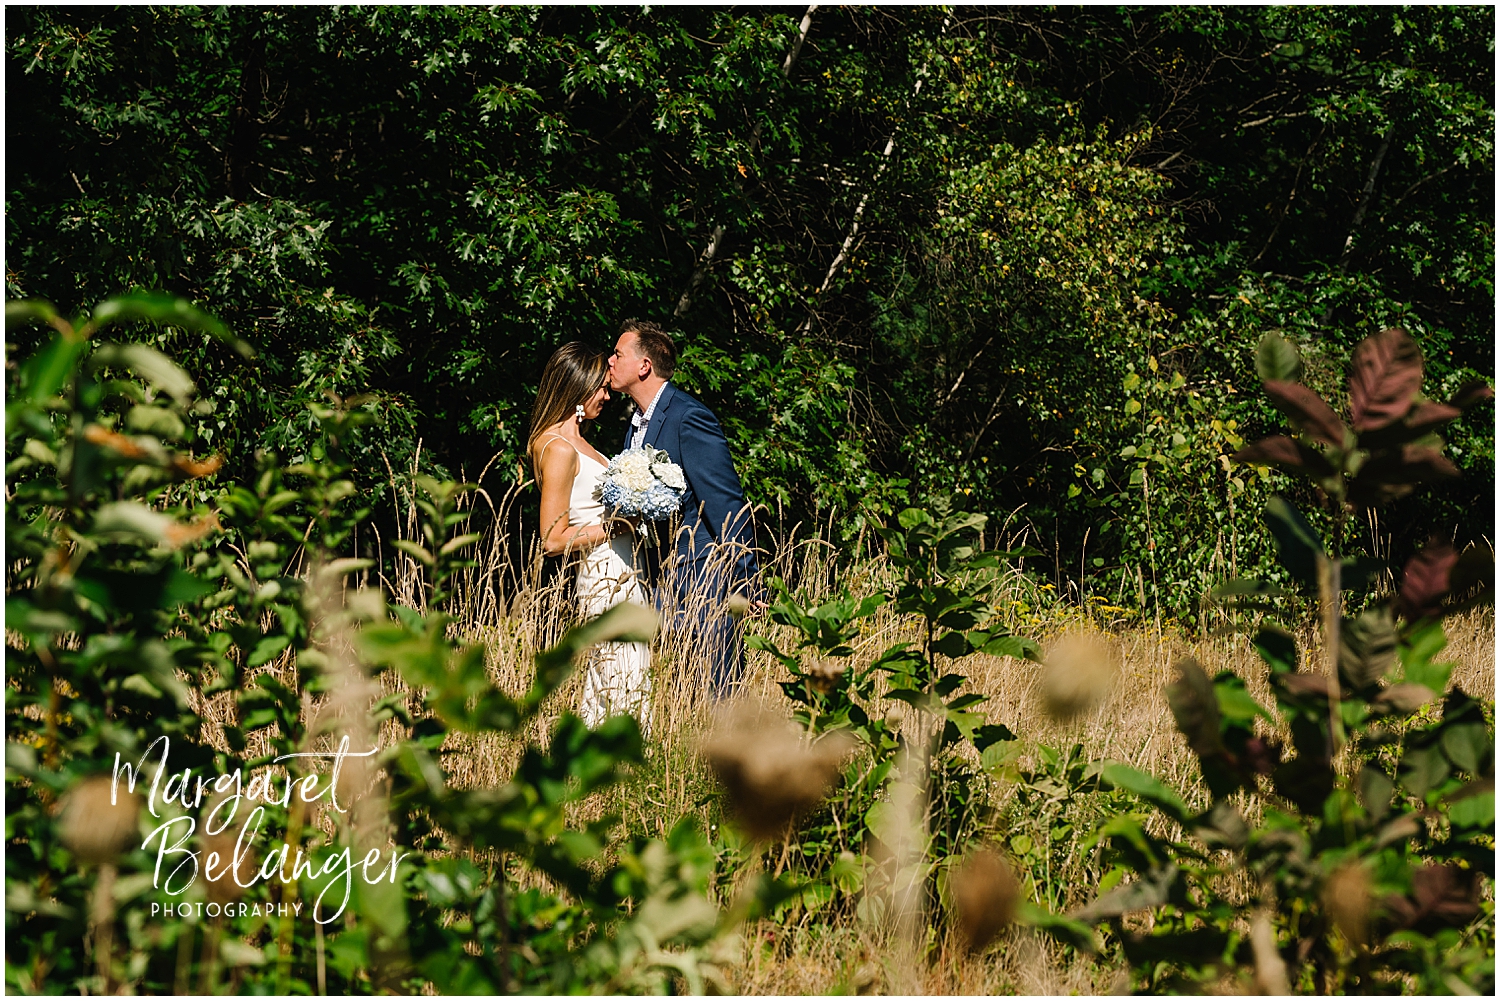 A groom kisses his bride's forehead amidst tall grass and greenery.